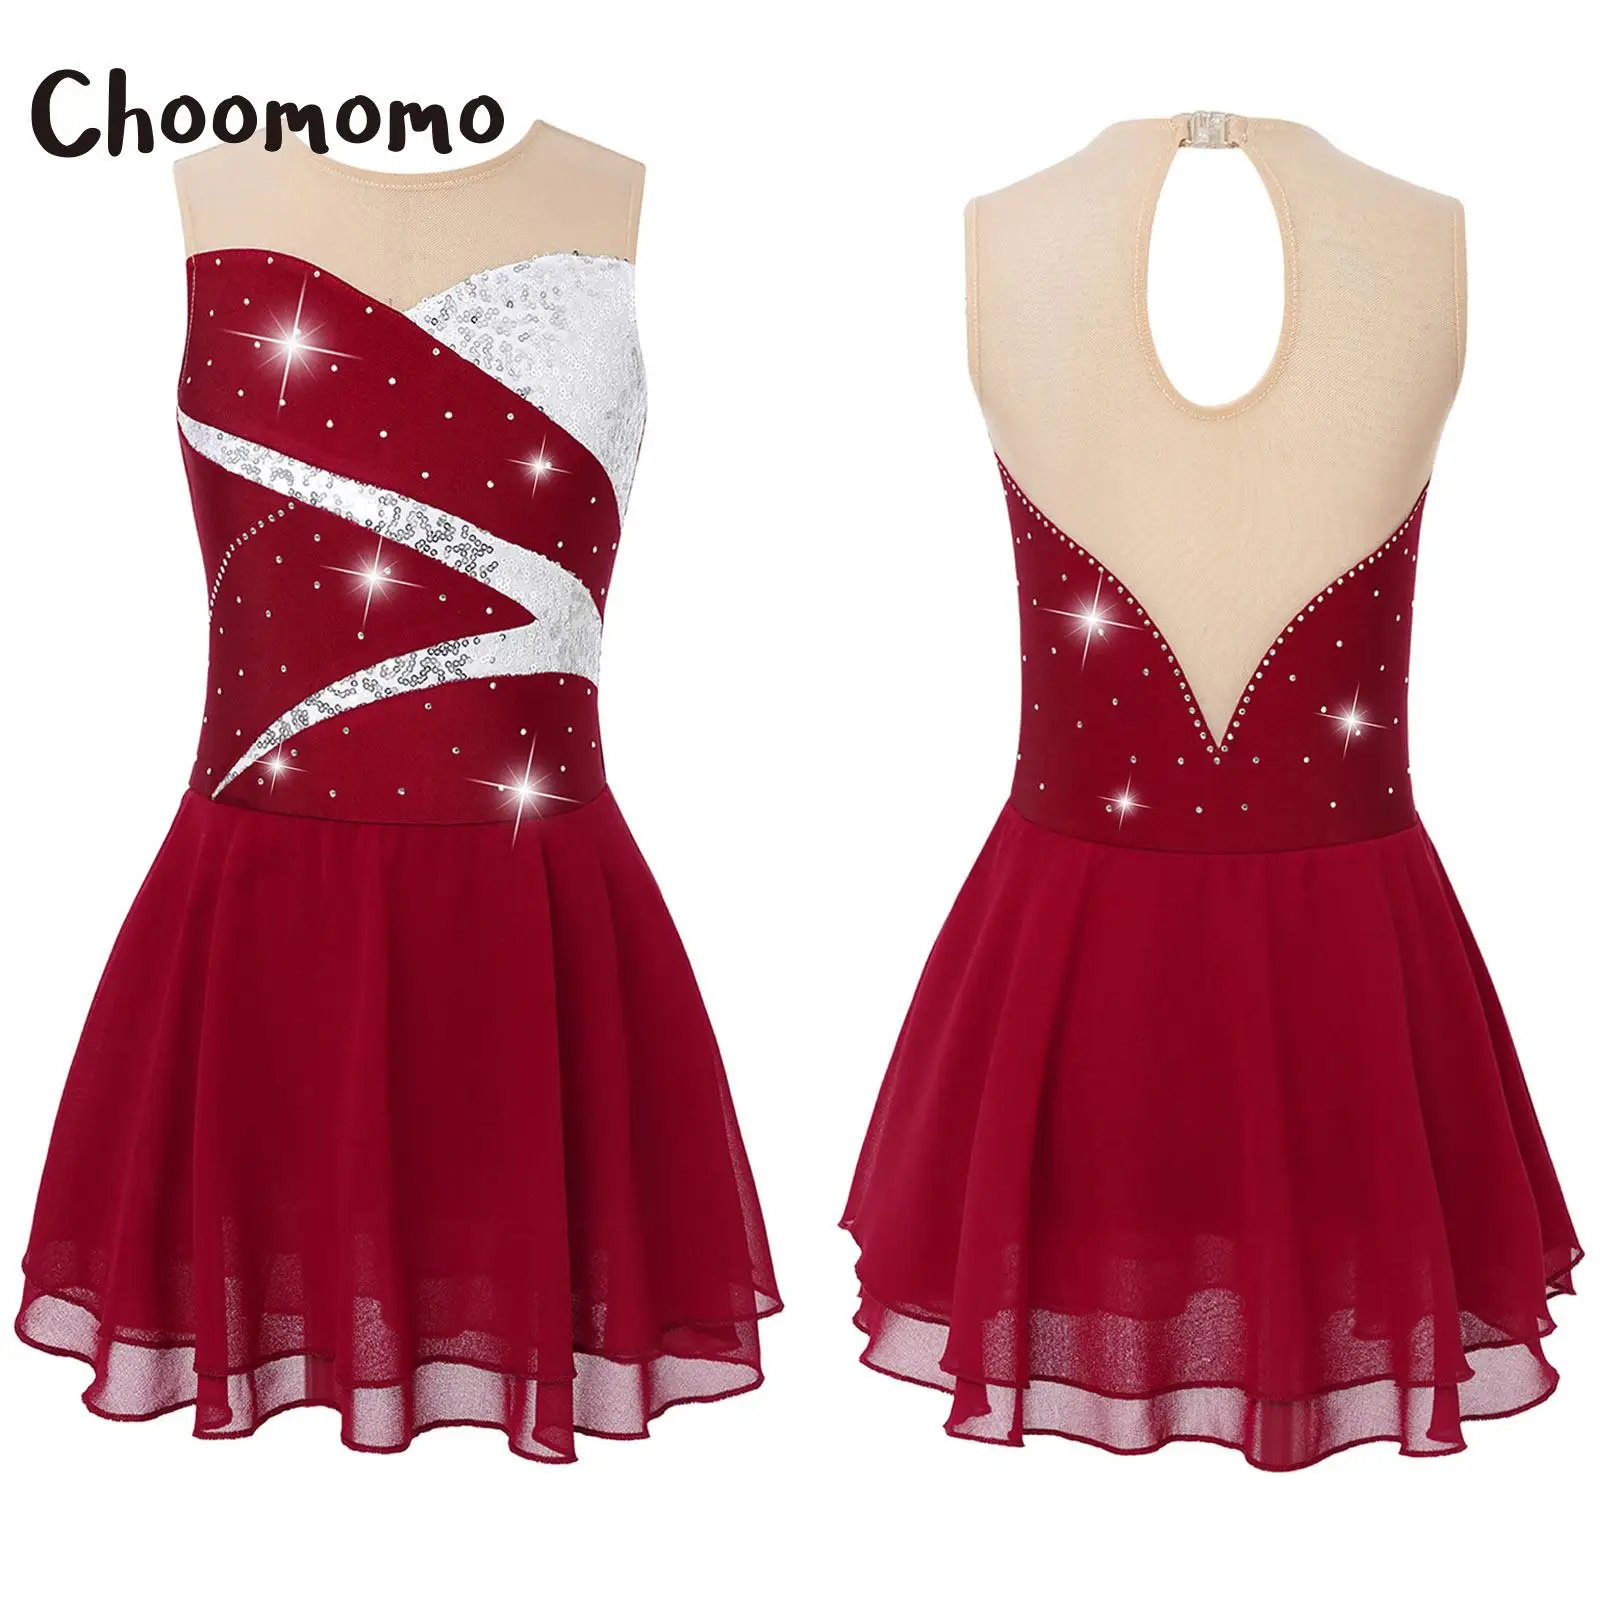 

Choomomo Kids Girls 1Pcs Red Sleeveless Shiny Sequins Rhinestone Dance Dress with Briefs Patchwork Style Hollow Back Dance Wears